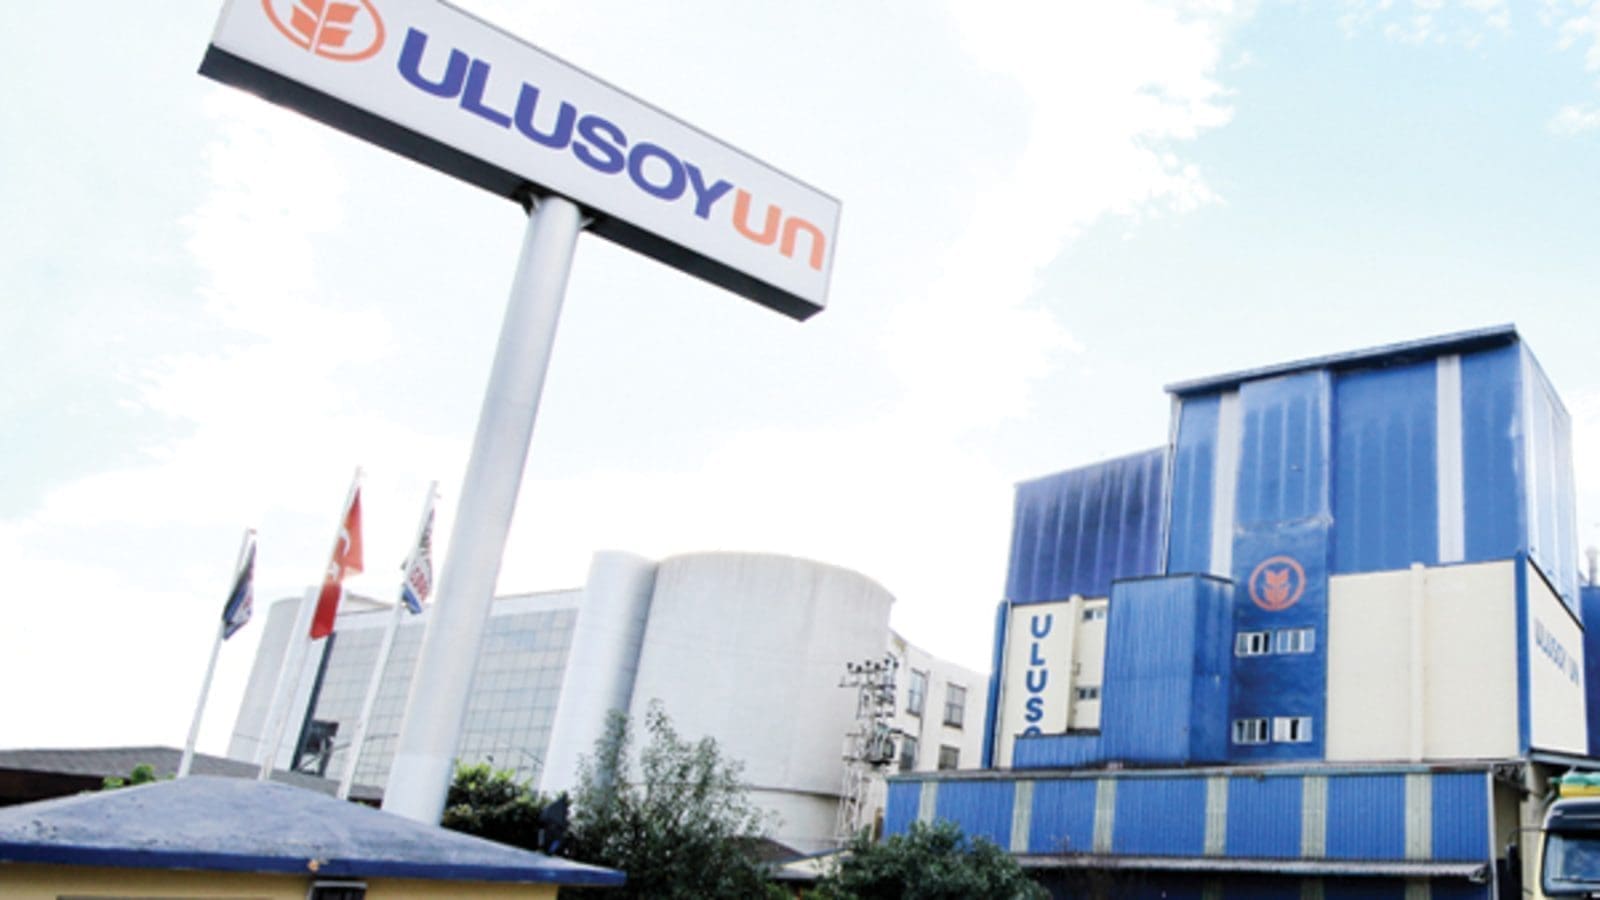 Turkey B2B flour miller Ulusoy secures funds from FMO to transition into retail sector